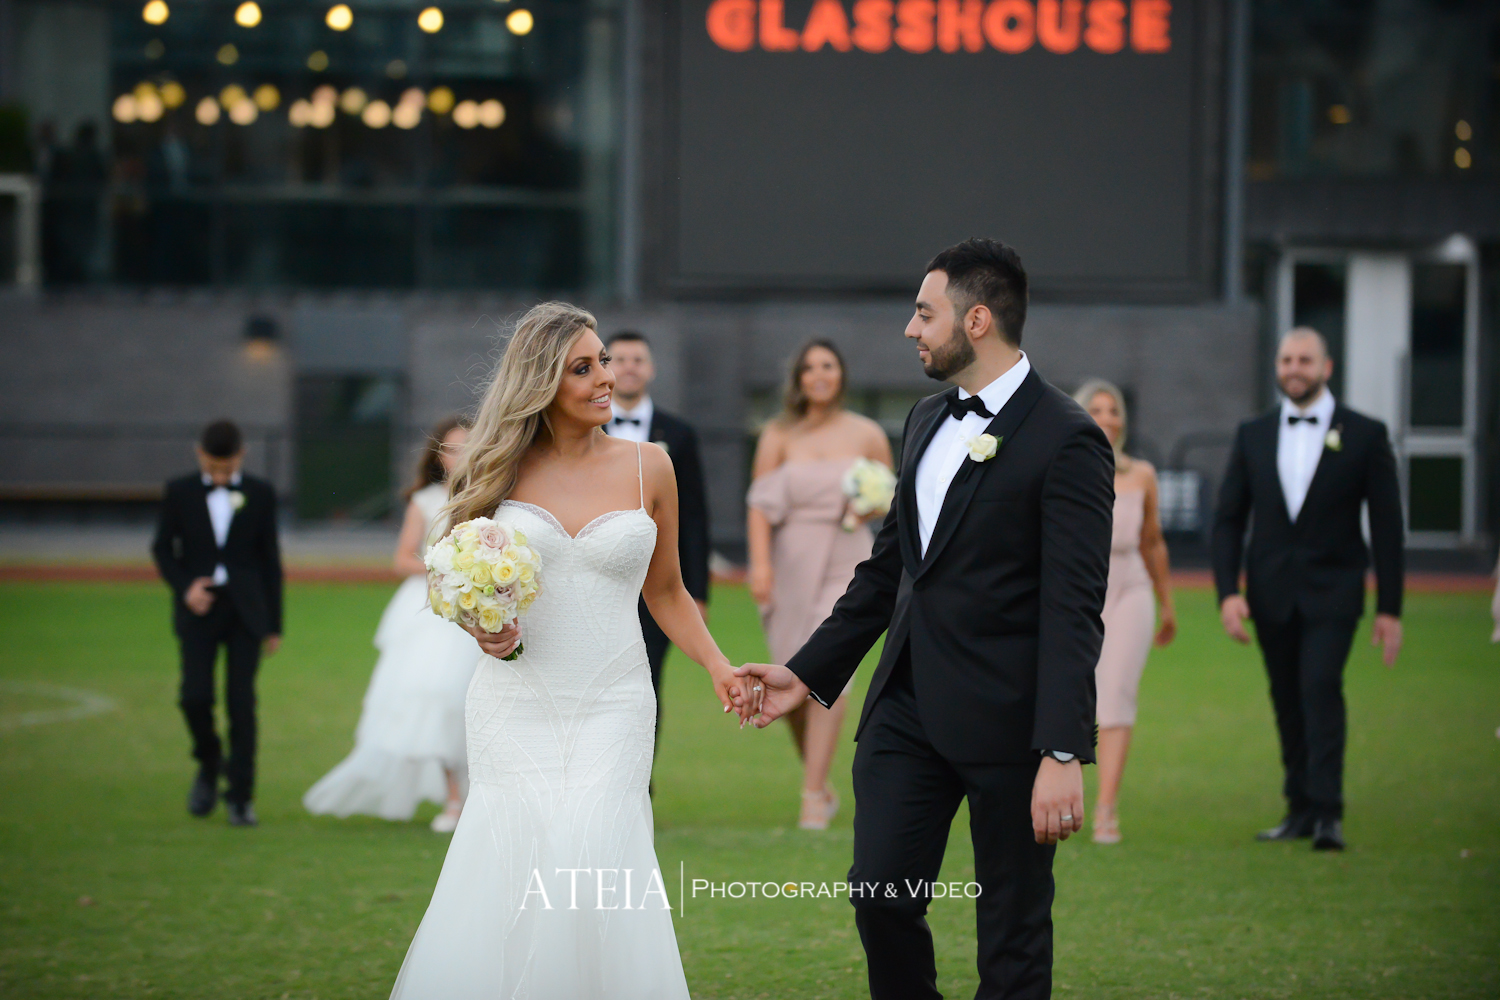 , Melbourne Wedding Photography &#8211; The Glasshouse / Annette of Melbourne